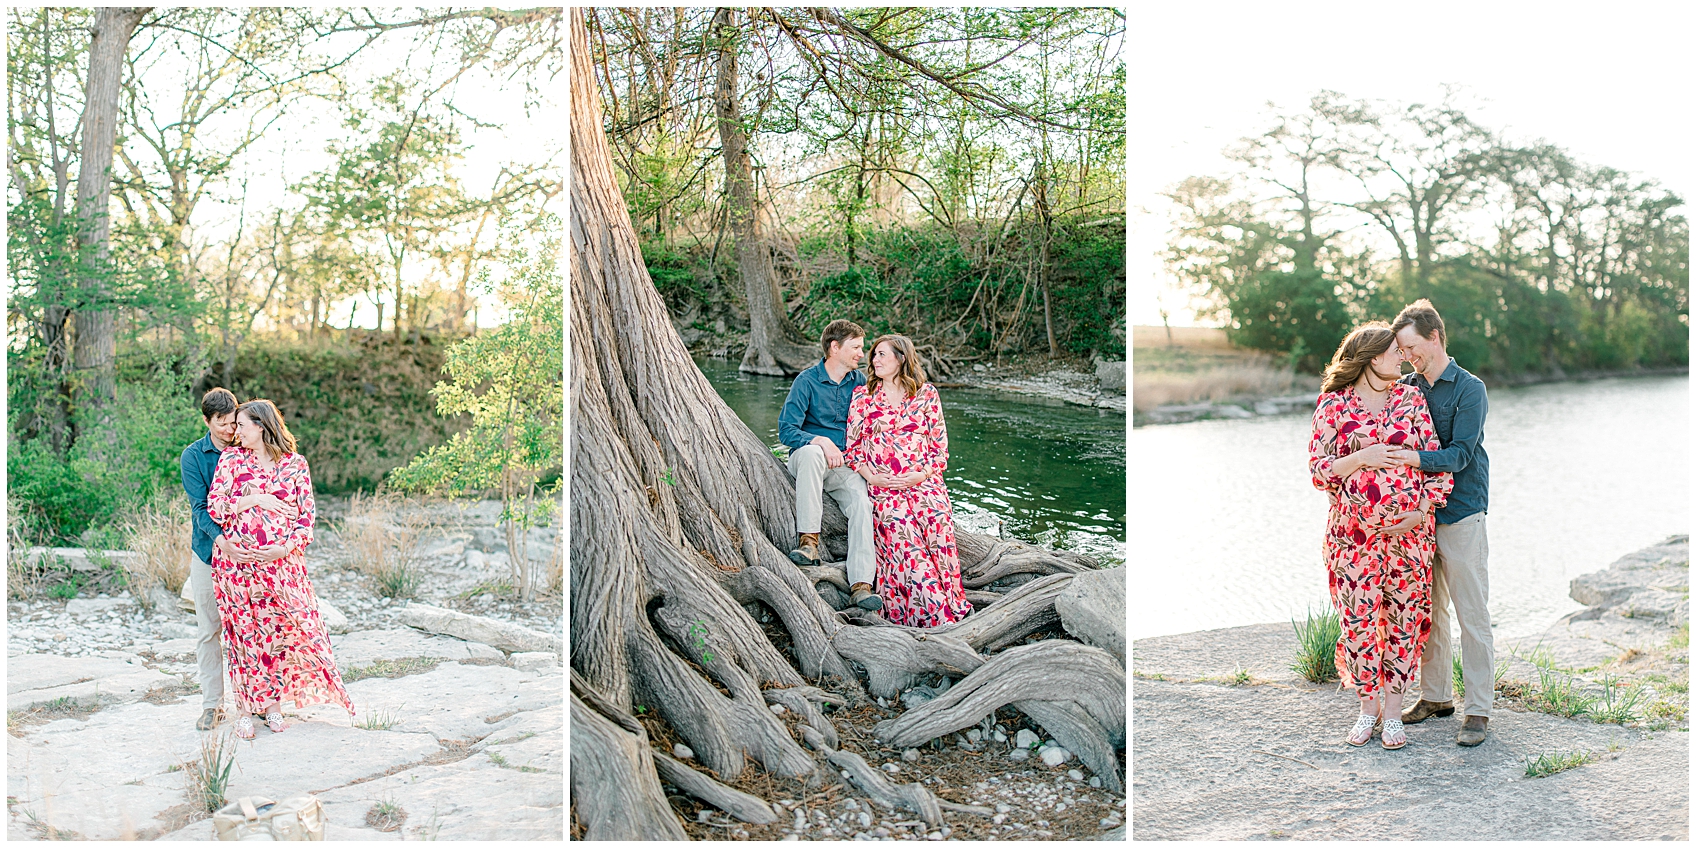 locations for elopements and micro intimate weddings in the texas hill country by allison jeffers photography 0006